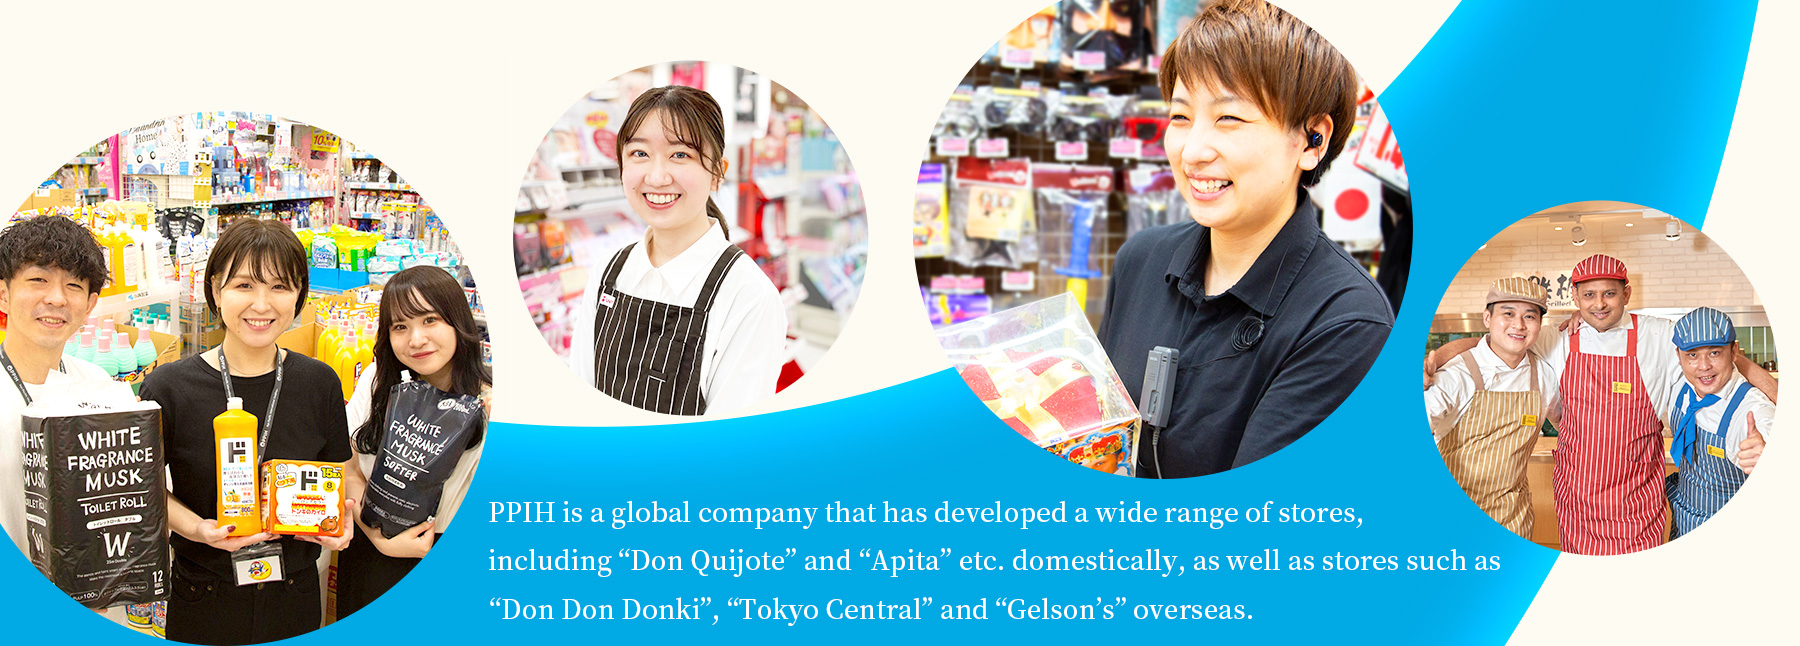 PPIH is a global company that has developed a wide range of stores, including “Don Quijote” and “Apita” etc. domestically, as well as stores such as “Don Don Donki”, “Tokyo Central” and “Gelson’s” overseas.
